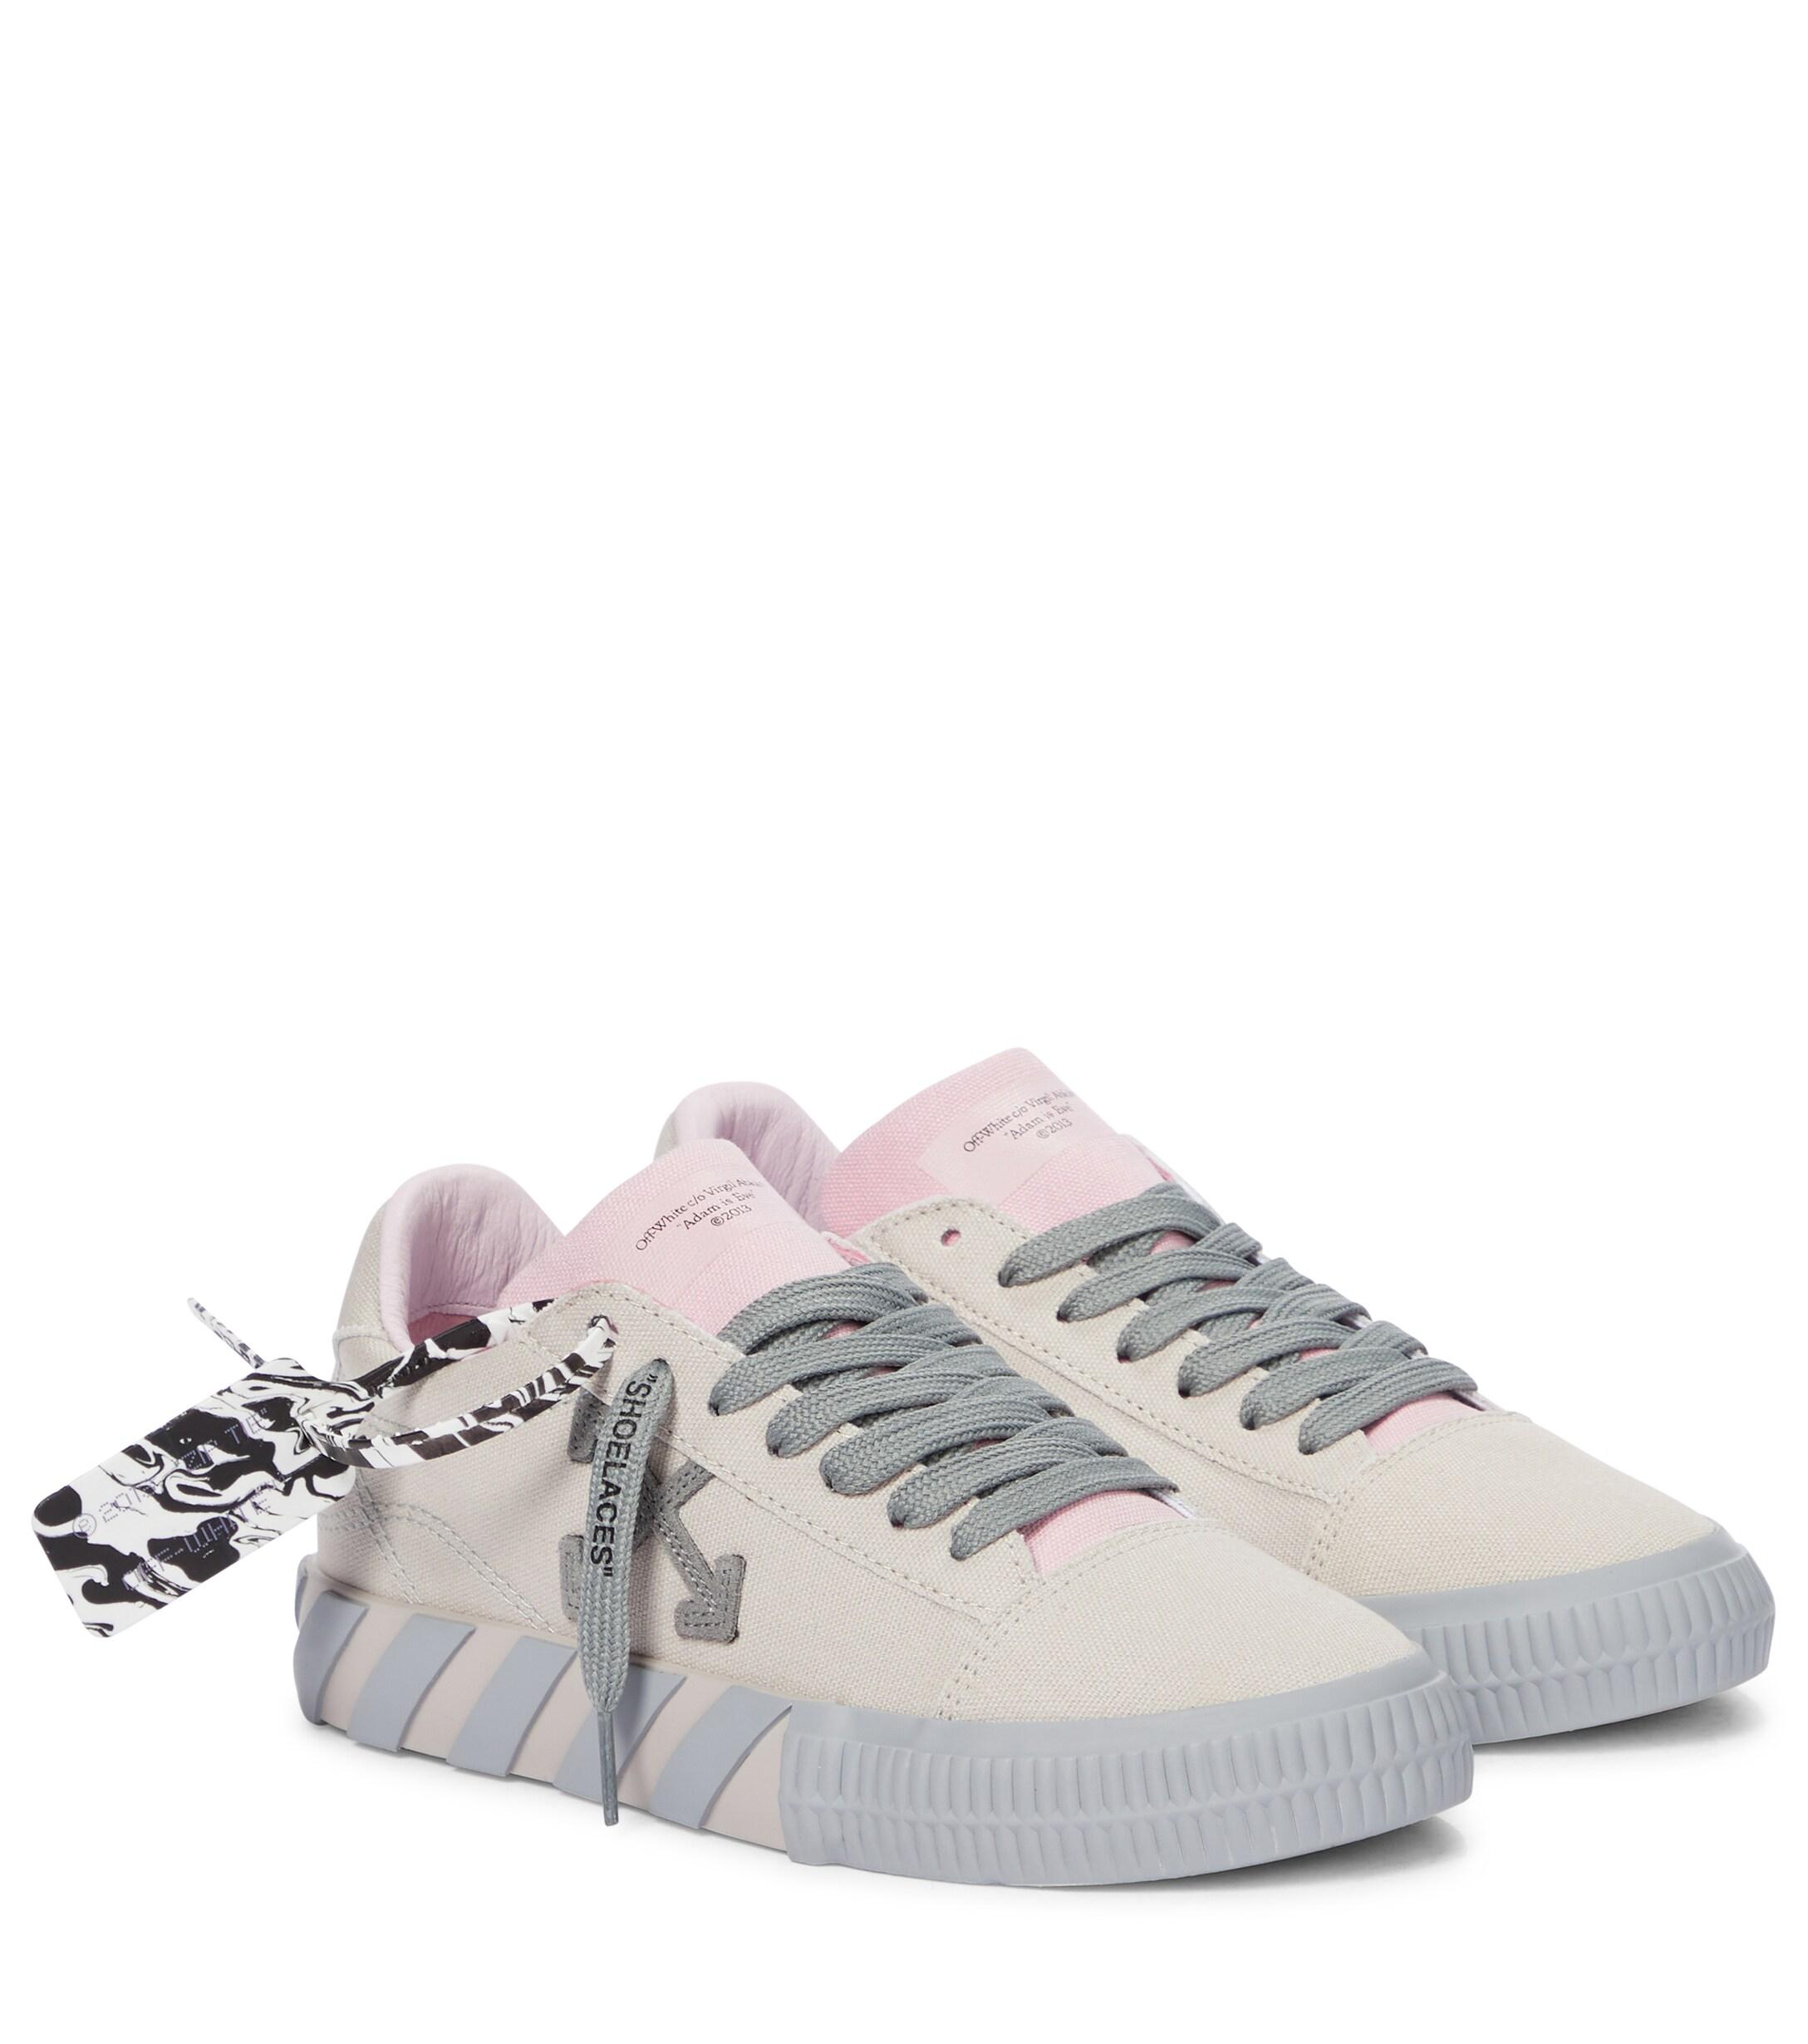 Off-White c/o Virgil Abloh Vulcanized Canvas Sneakers in Natural | Lyst